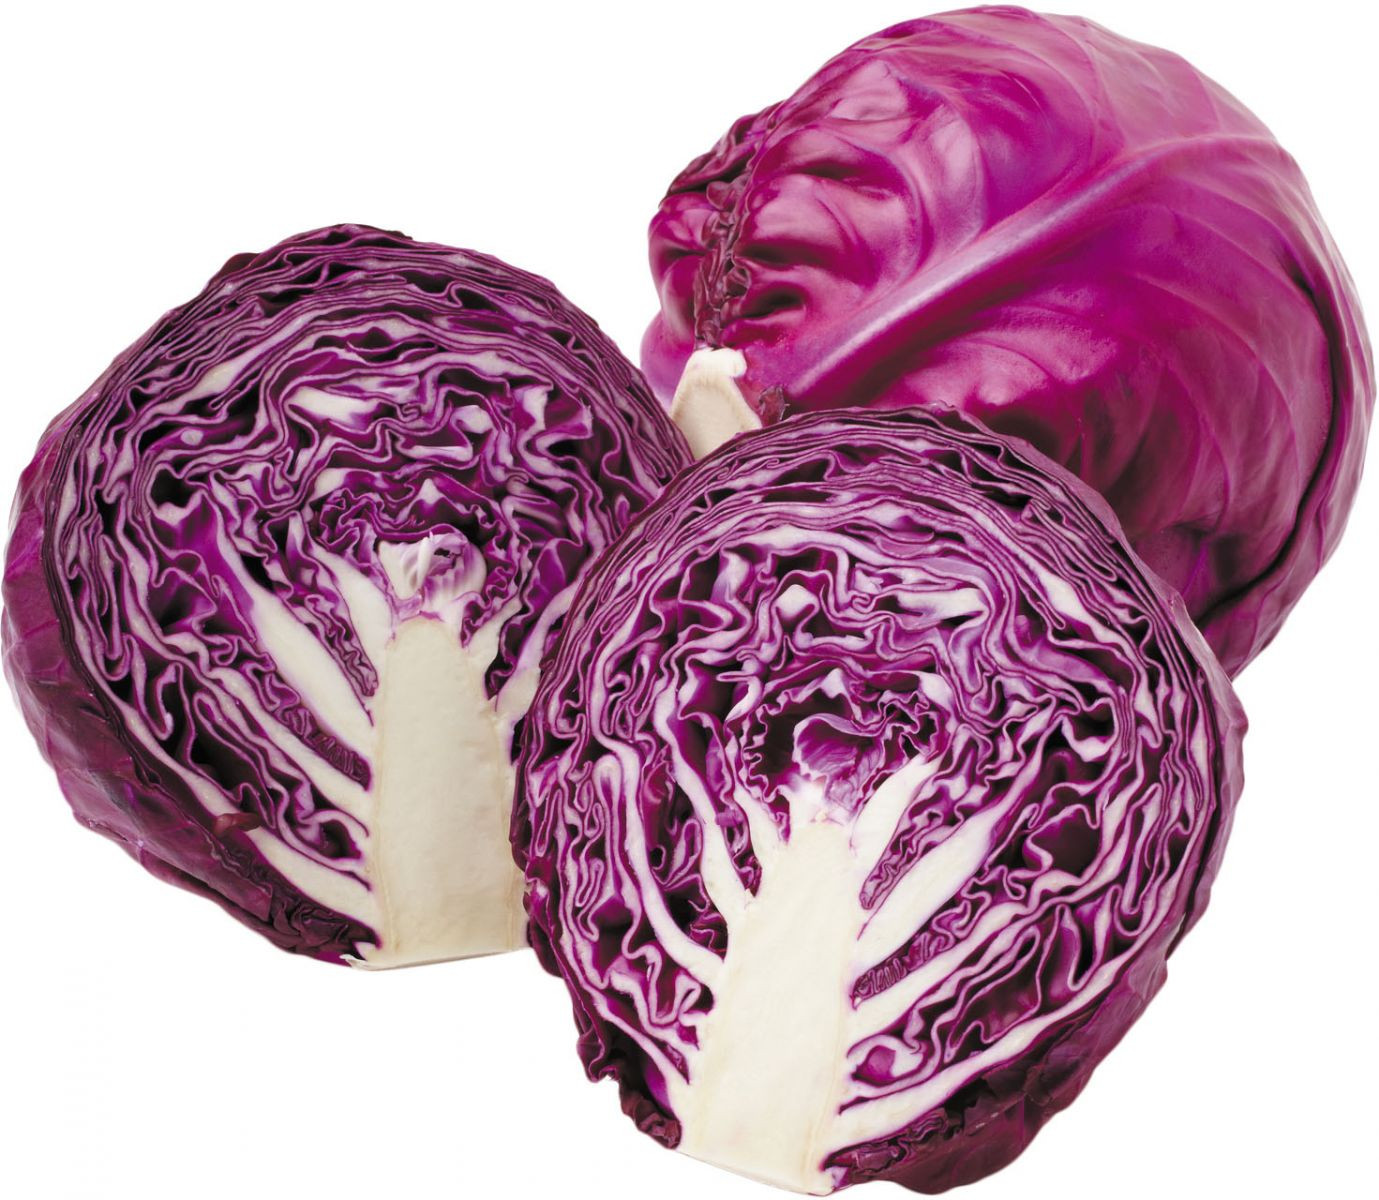 Red cabbage/count